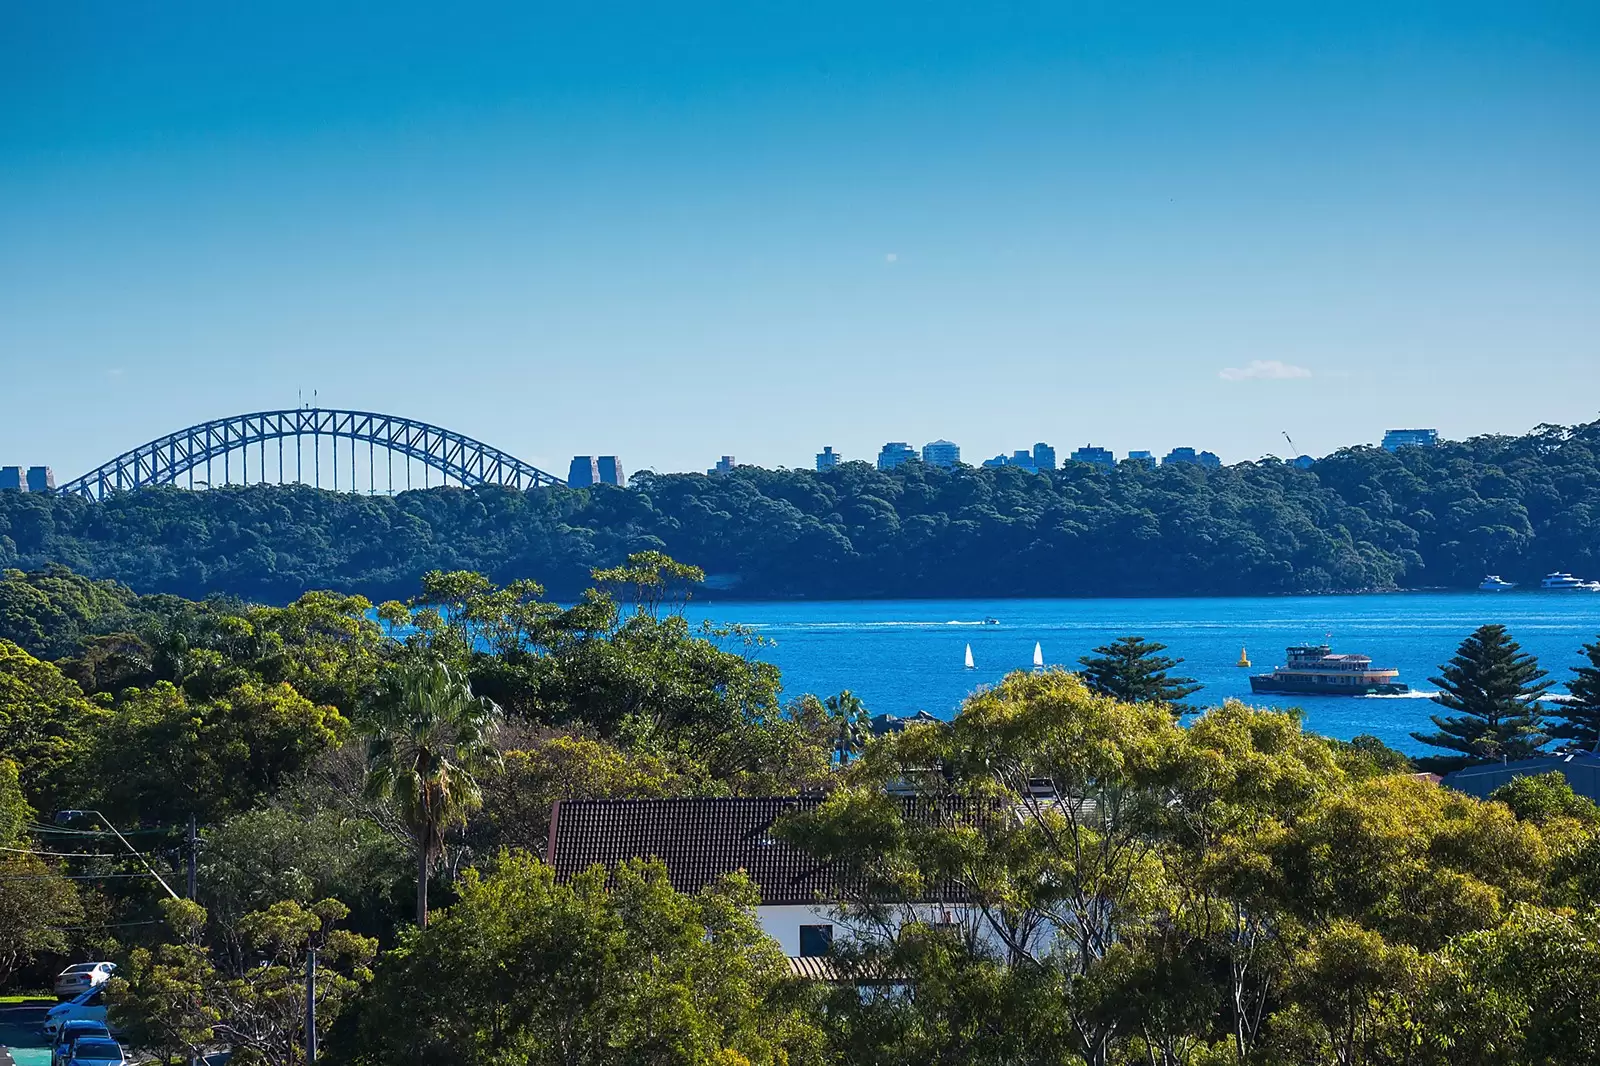 Photo #4: 7 Bell Street, Vaucluse - Sold by Sydney Sotheby's International Realty